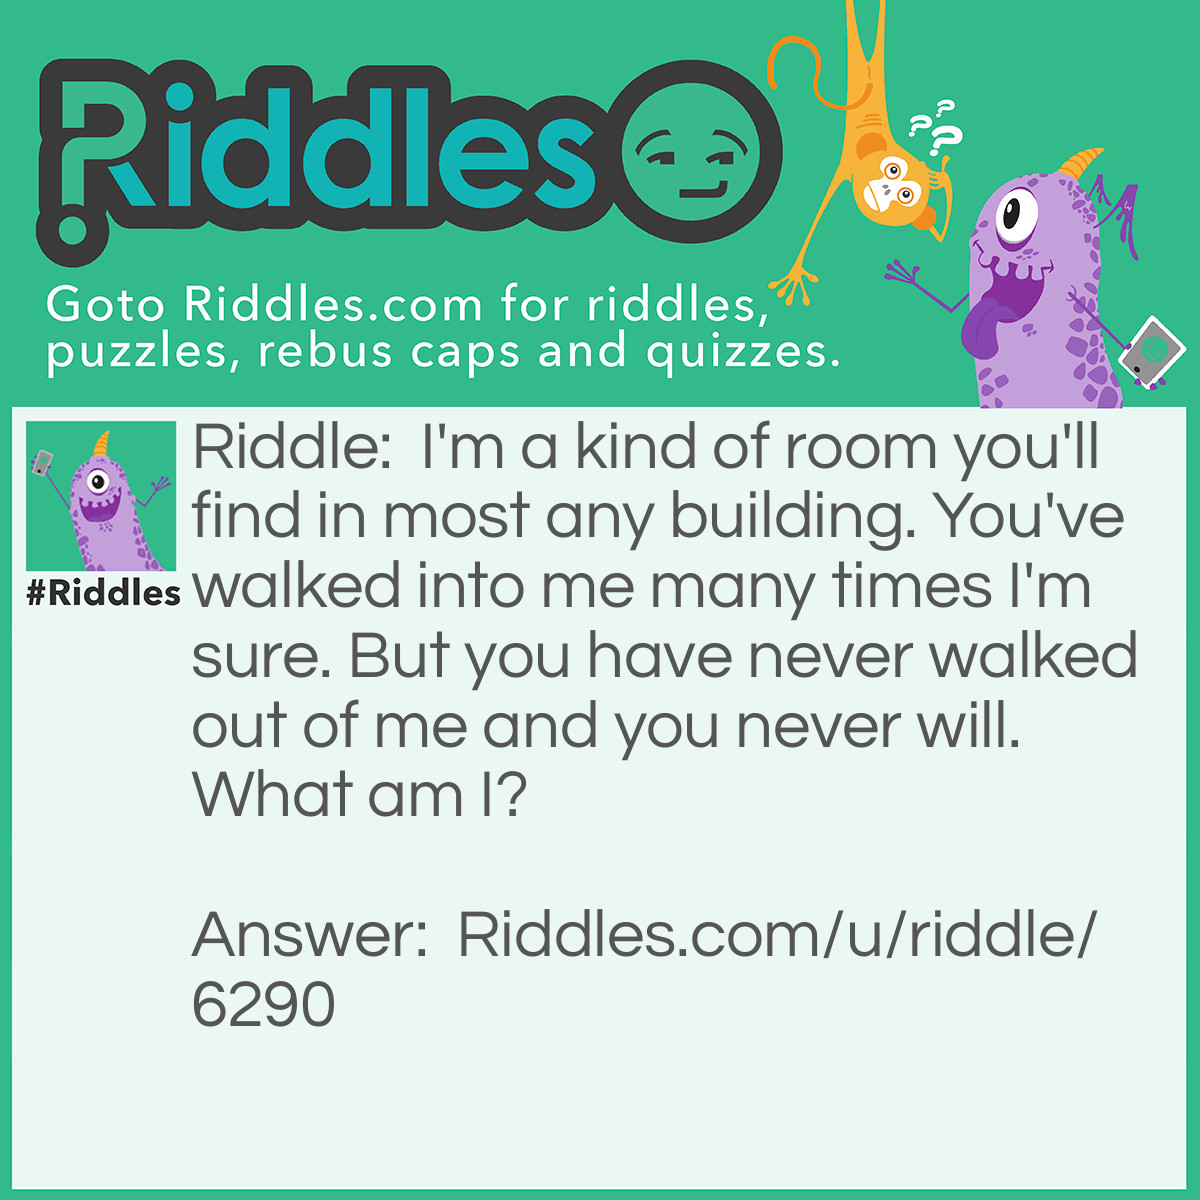 Riddle: I'm a kind of room you'll find in most any building. You've walked into me many times I'm sure. But you have never walked out of me and you never will. What am I? Answer: An empty room.